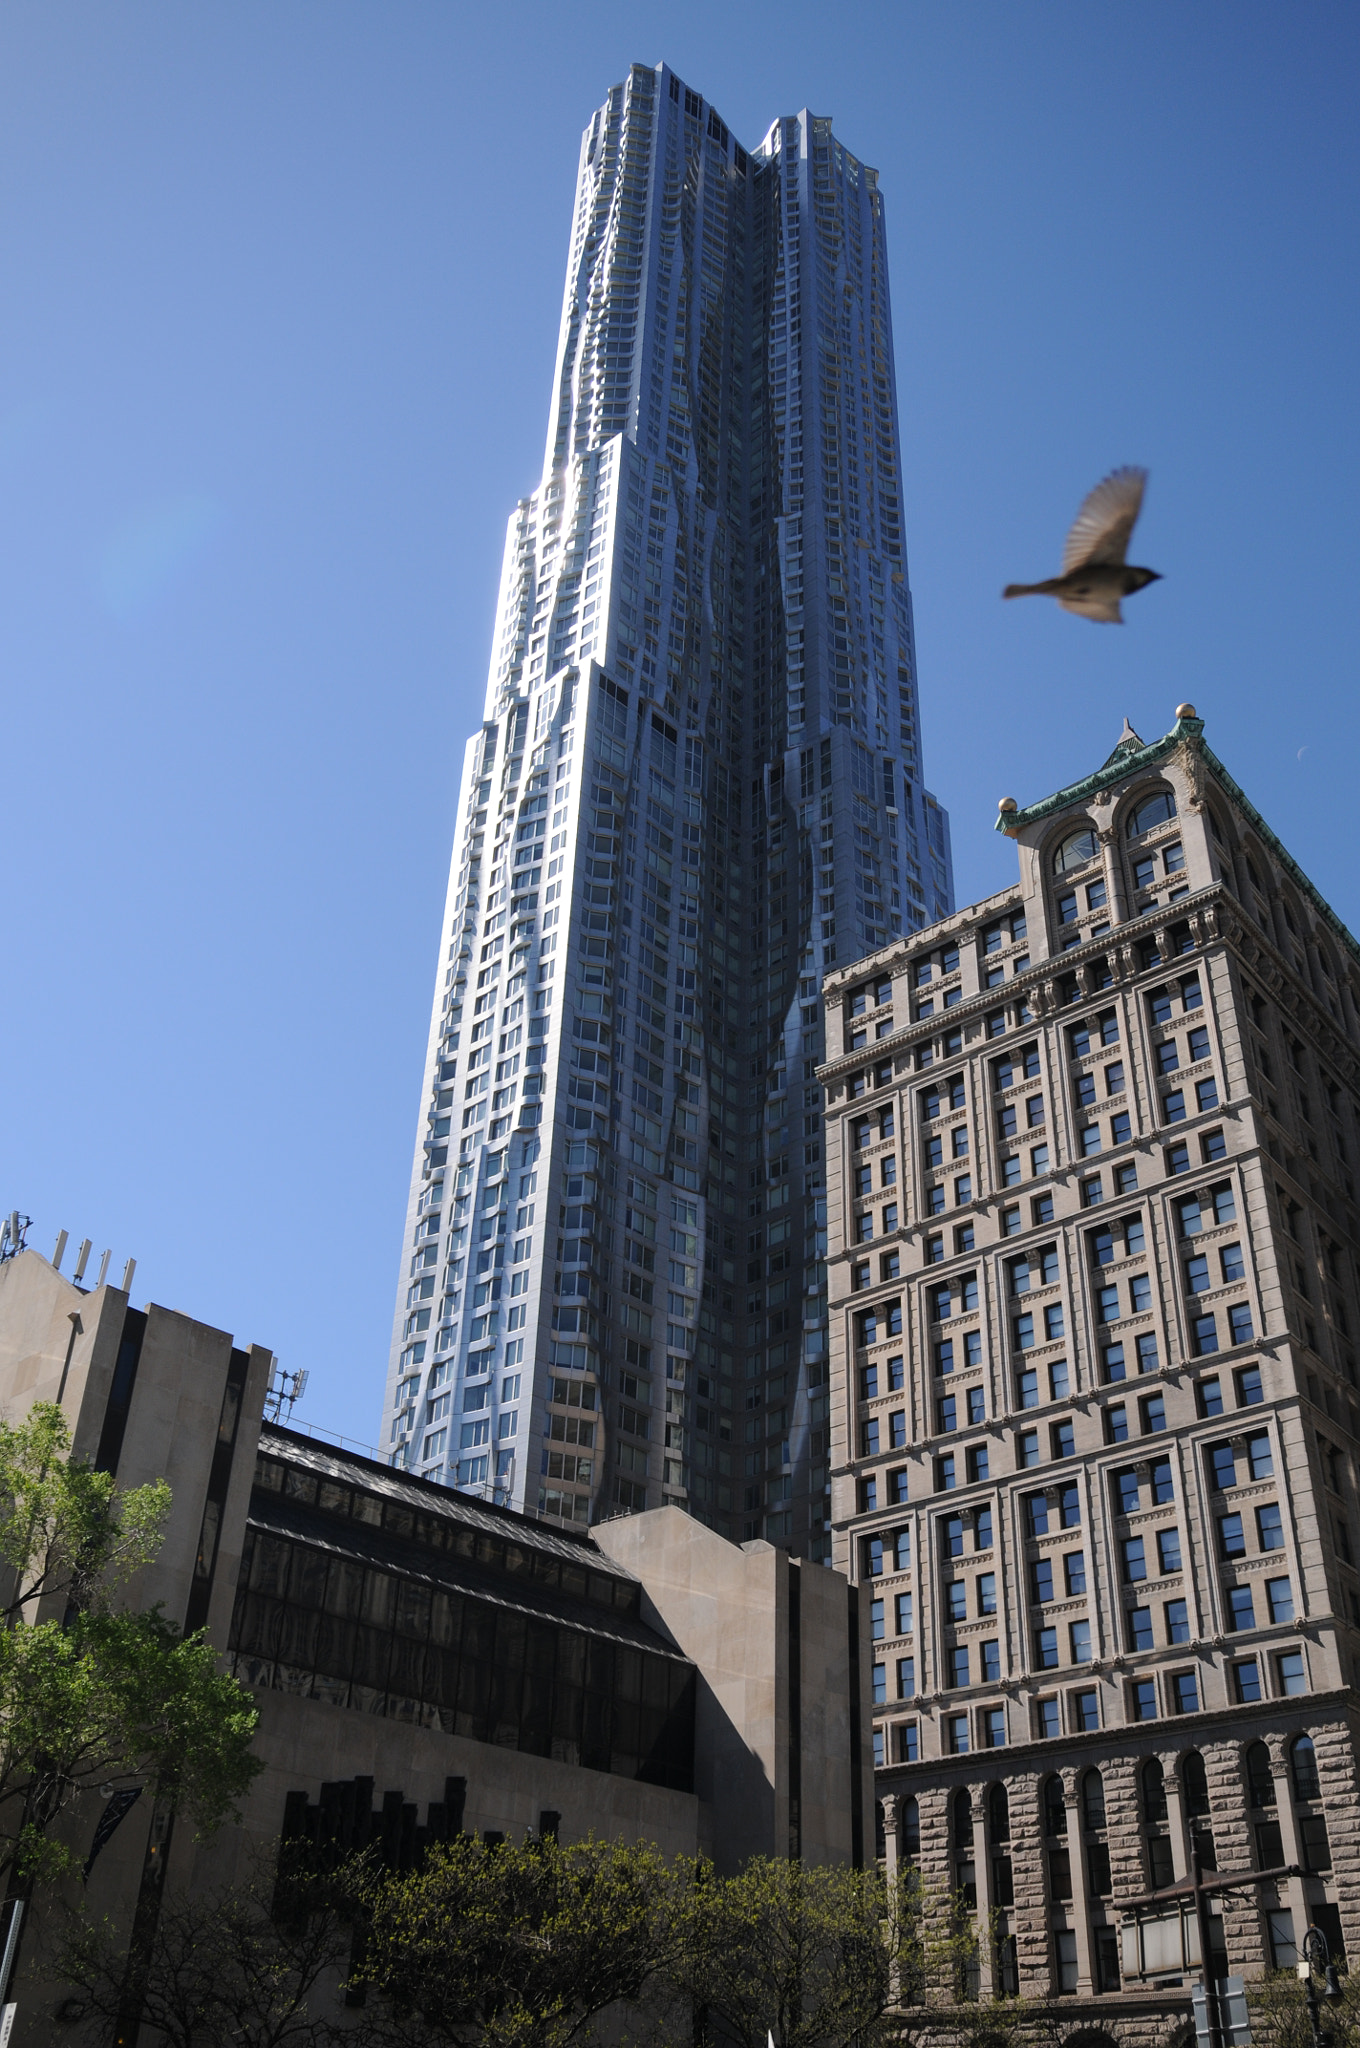 Nikon D300 sample photo. Before to cross the brooklyn bridge, i was interested by this original building. photography